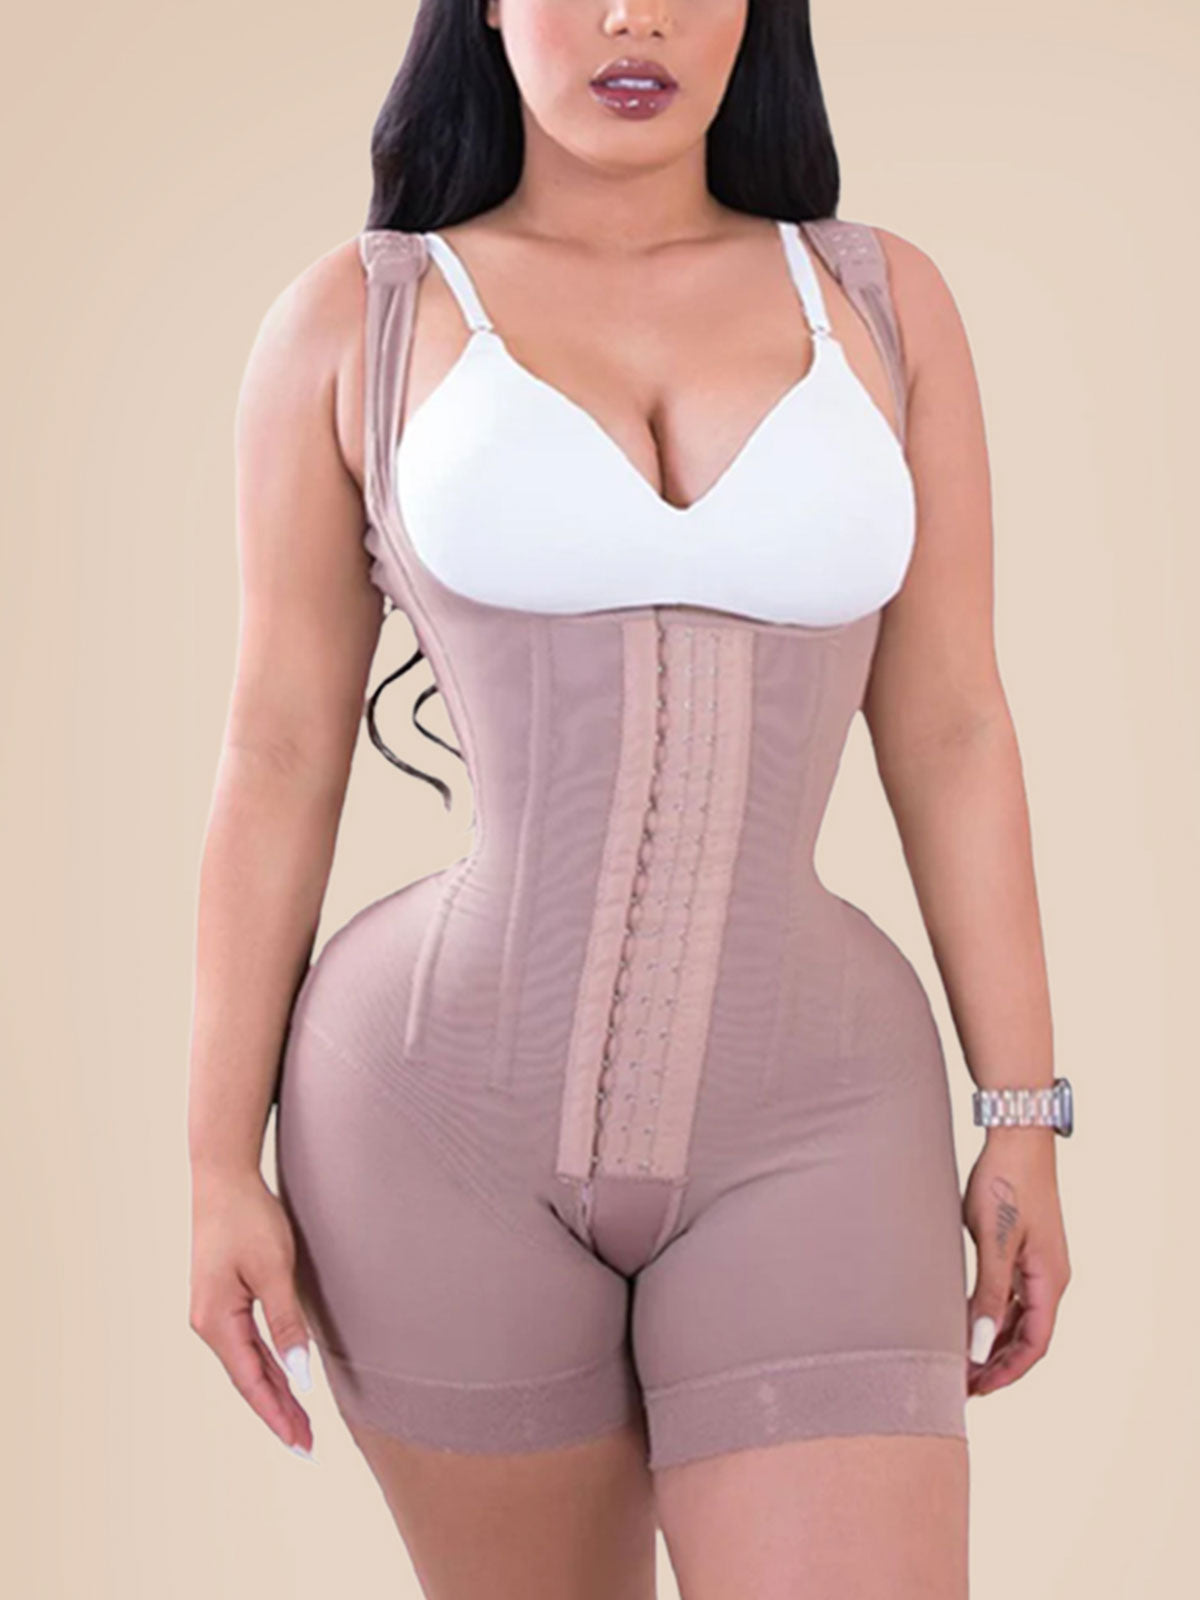 ChicCurve Best Shapewear for Women – ChicCurve